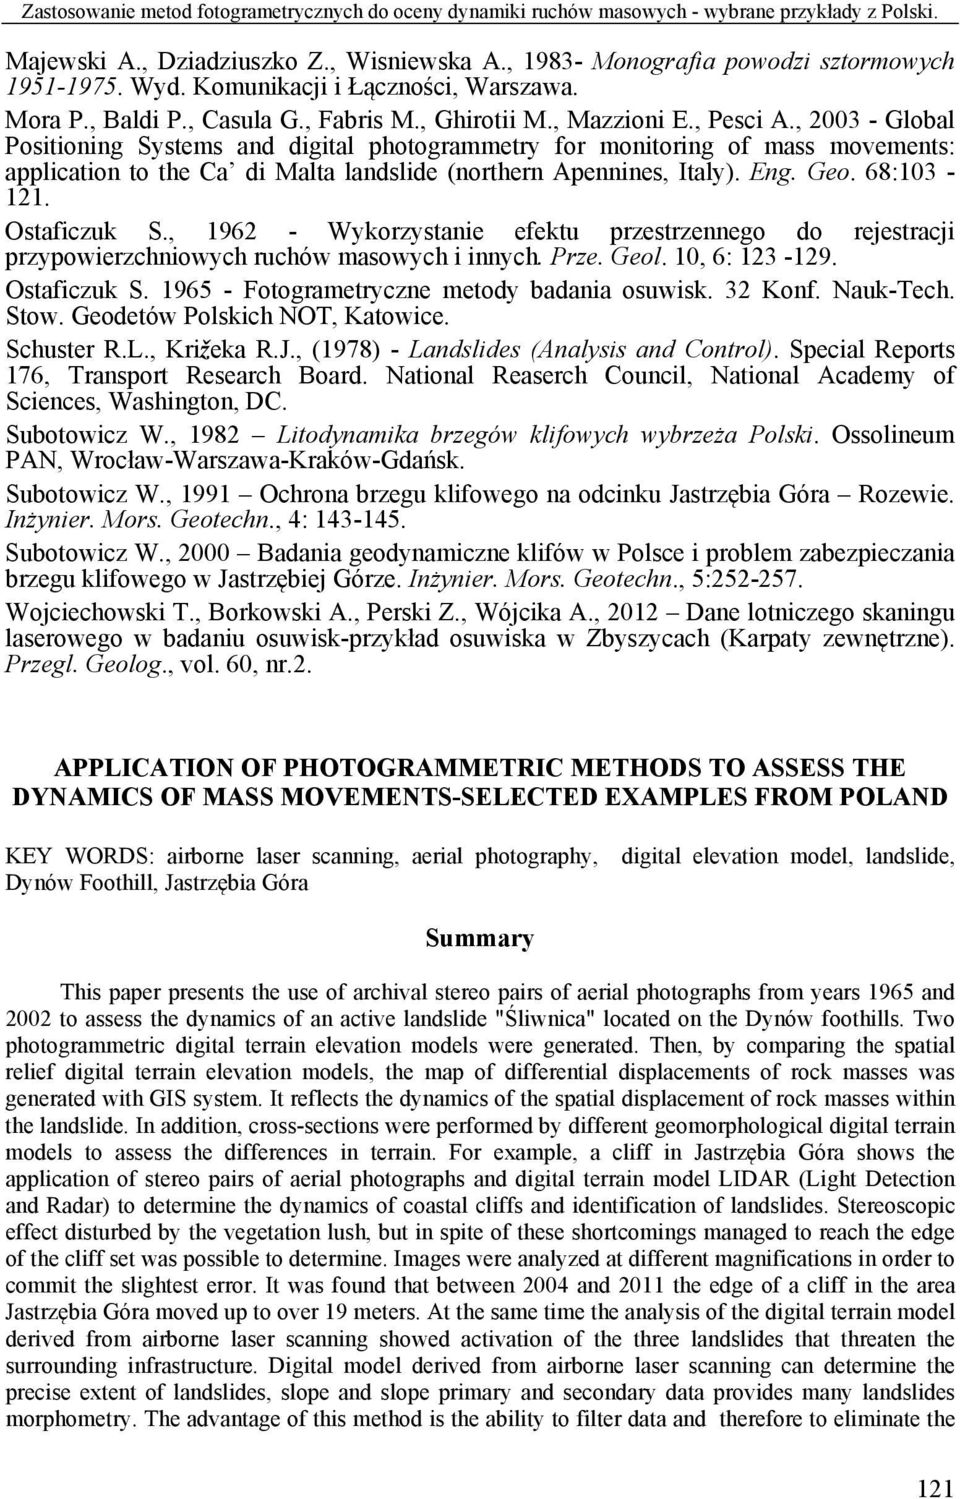 , 2003 - Global Positioning Systems and digital photogrammetry for monitoring of mass movements: application to the Ca di Malta landslide (northern Apennines, Italy). Eng. Geo. 68:103-121.